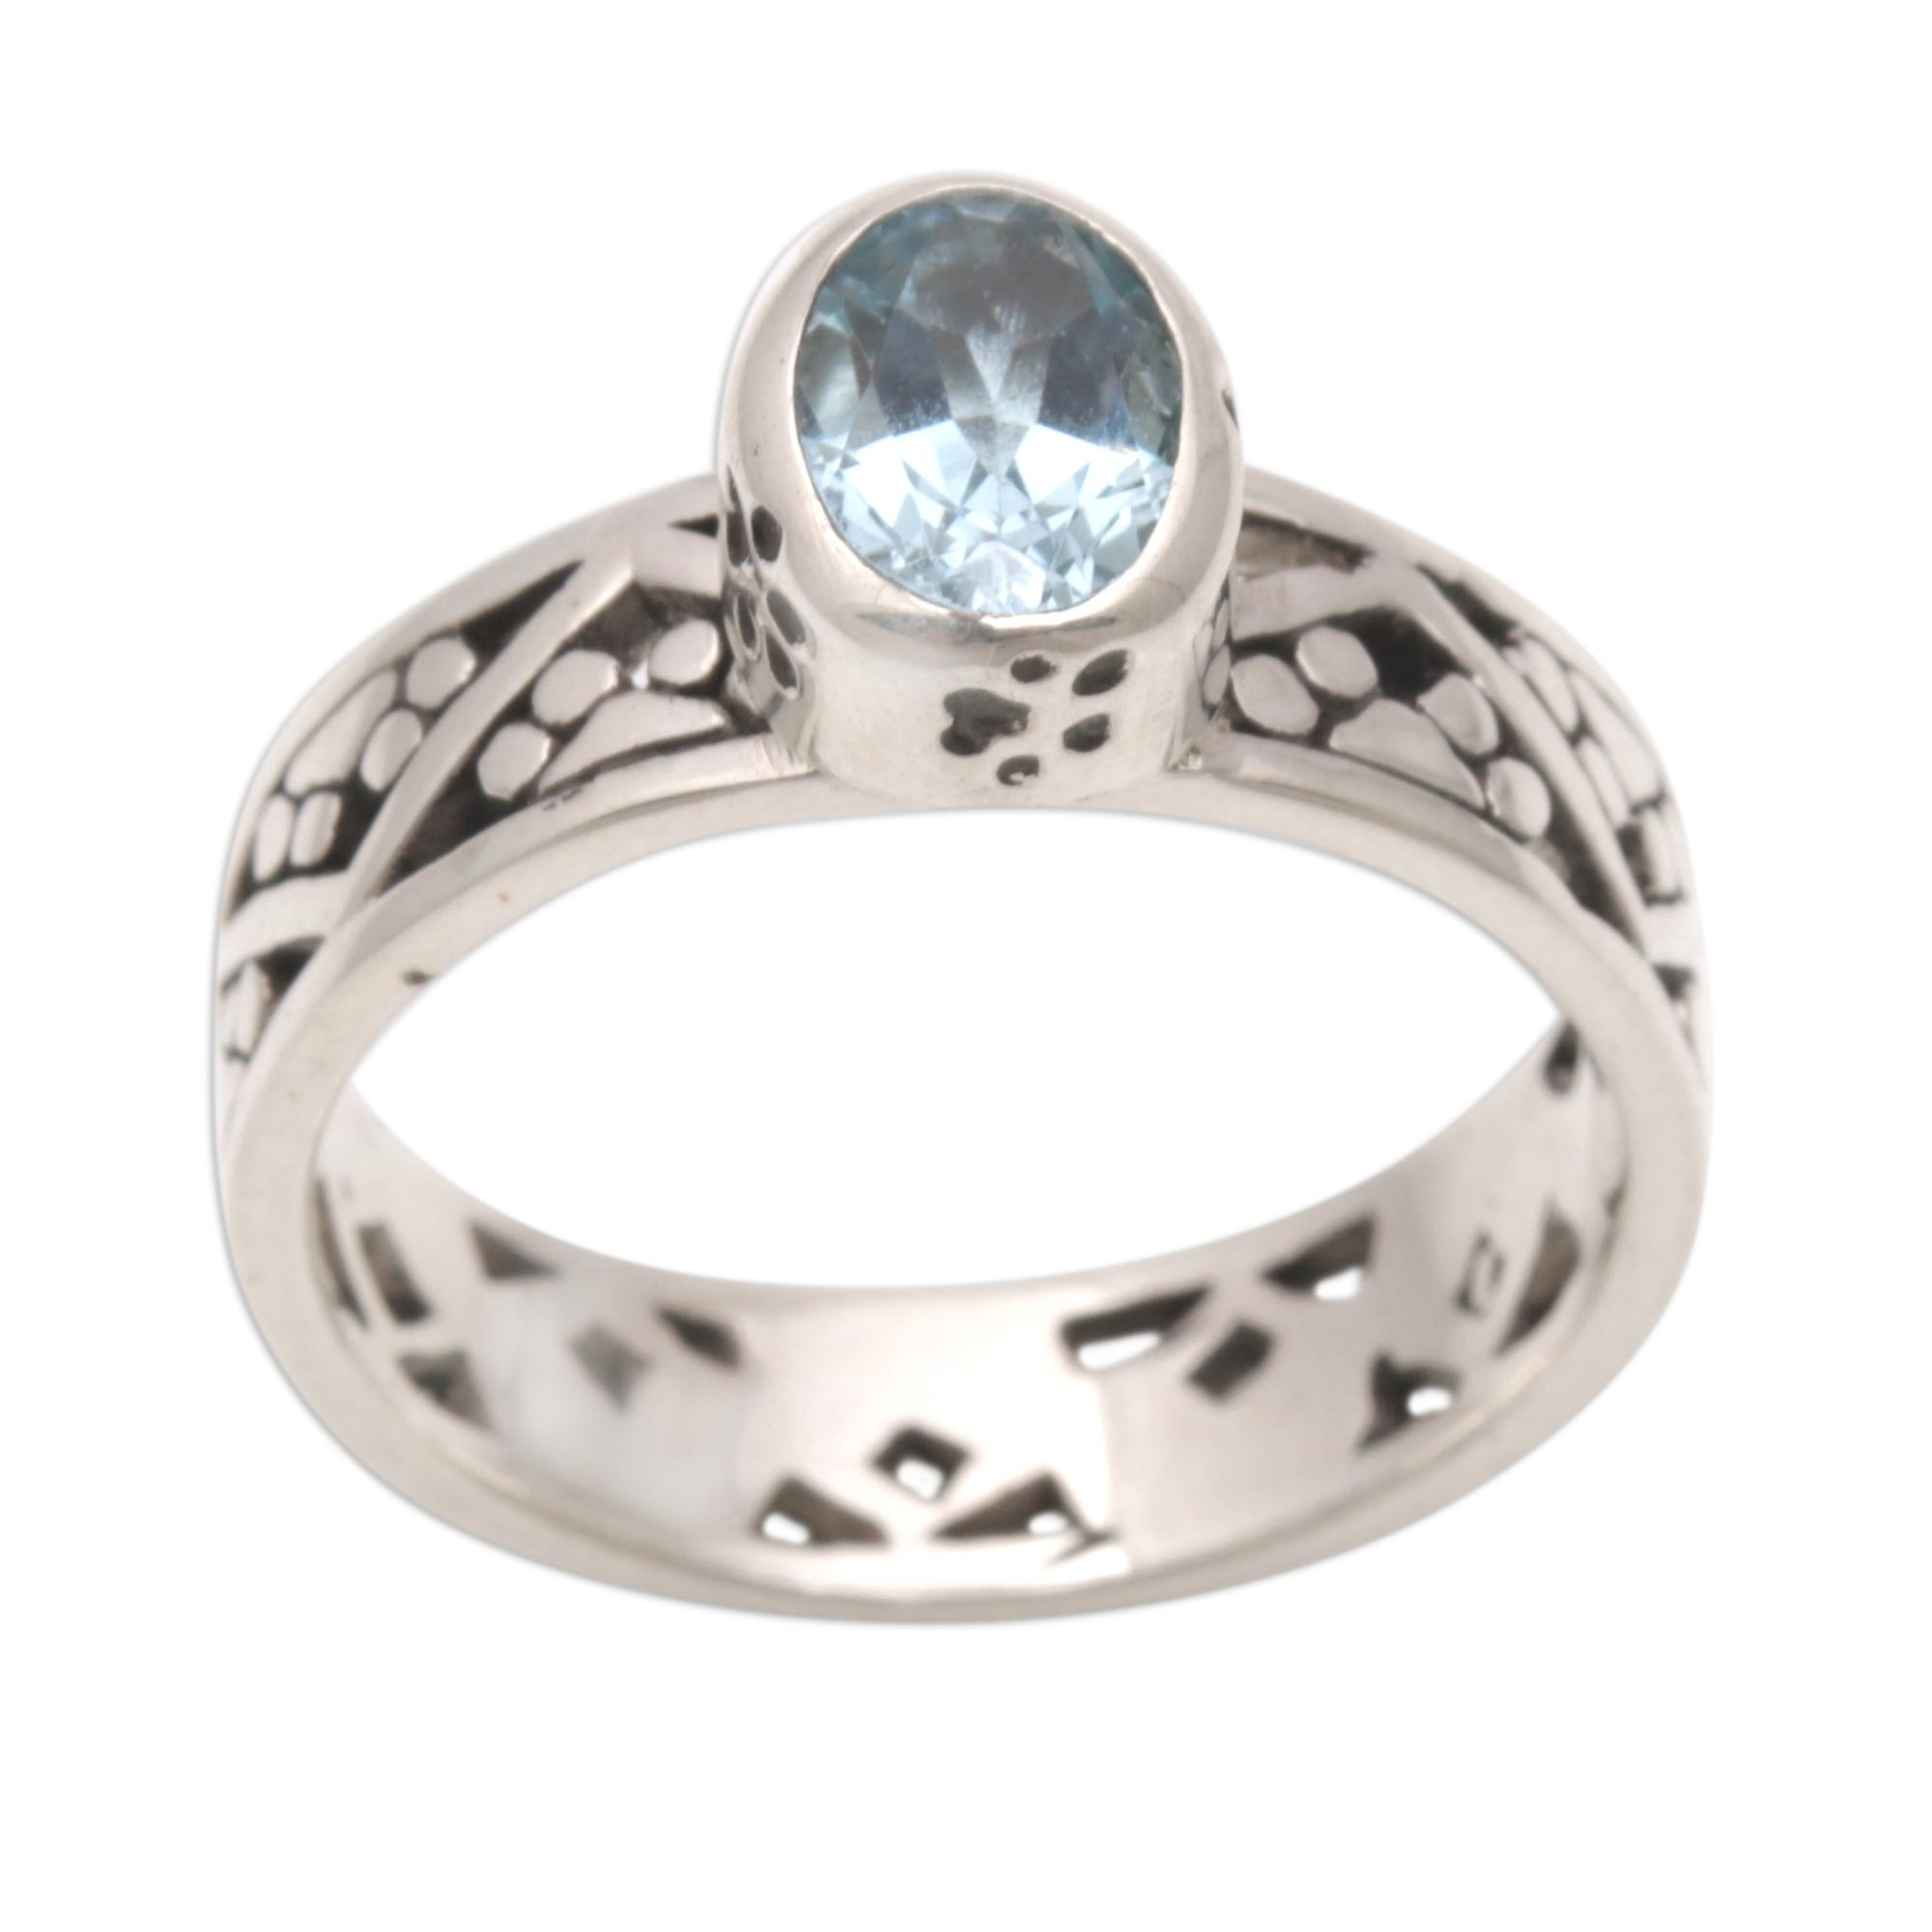 Polair Kosmisch aardappel UNICEF Market | Blue Topaz and Sterling Silver Single Stone Ring from Bali  - Paws for a Cause